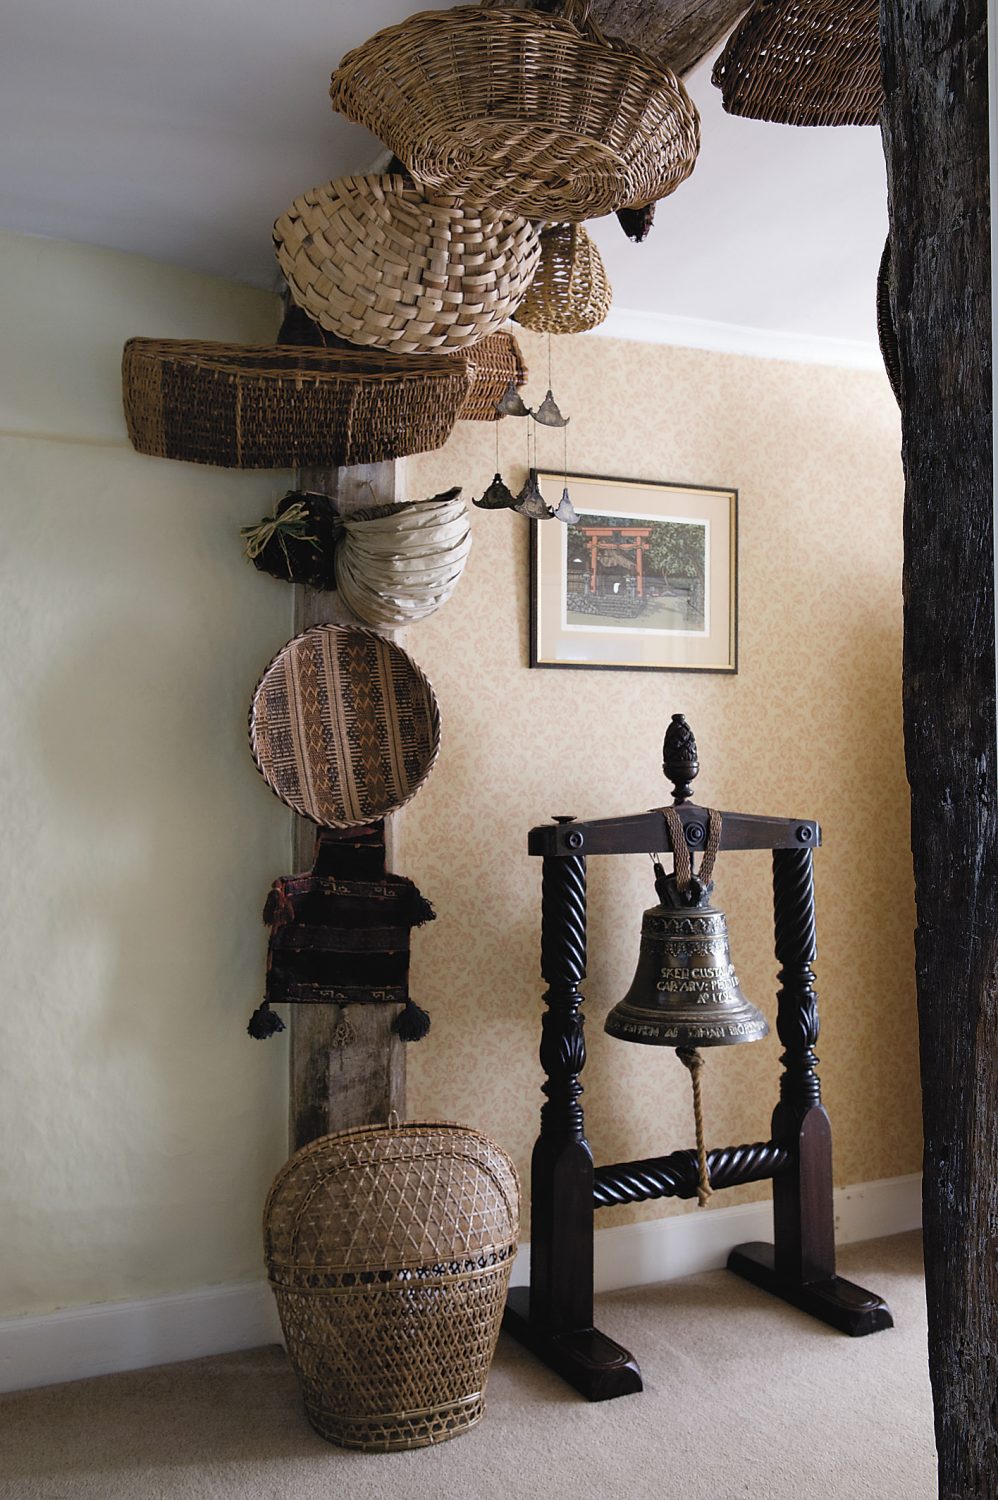 Jemima’s collection of baskets from around the world